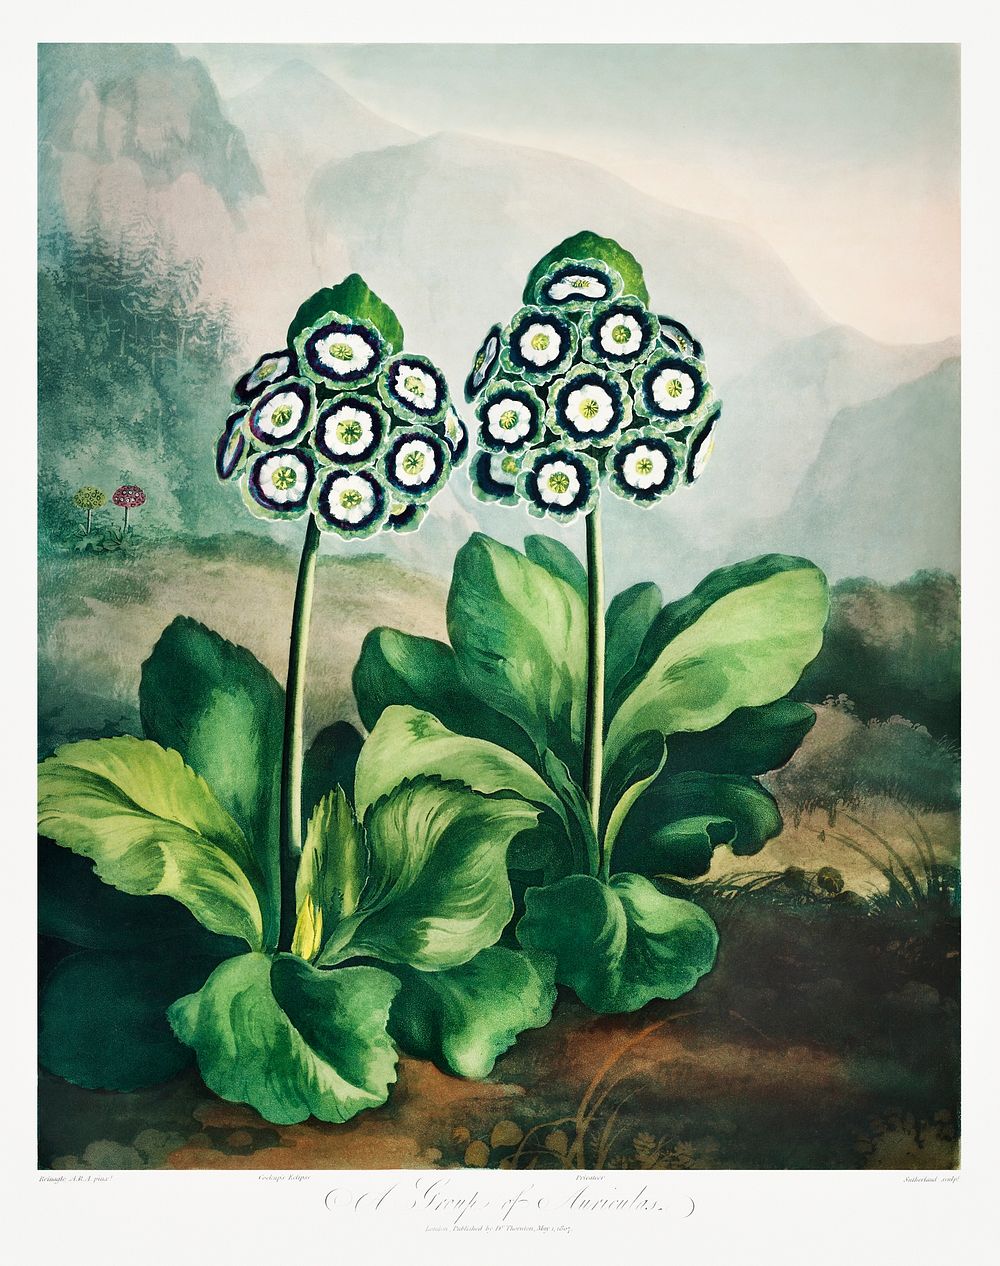 A Group of Auriculas from The Temple of Flora (1807) by Robert John Thornton. Original from Biodiversity Heritage Library.…